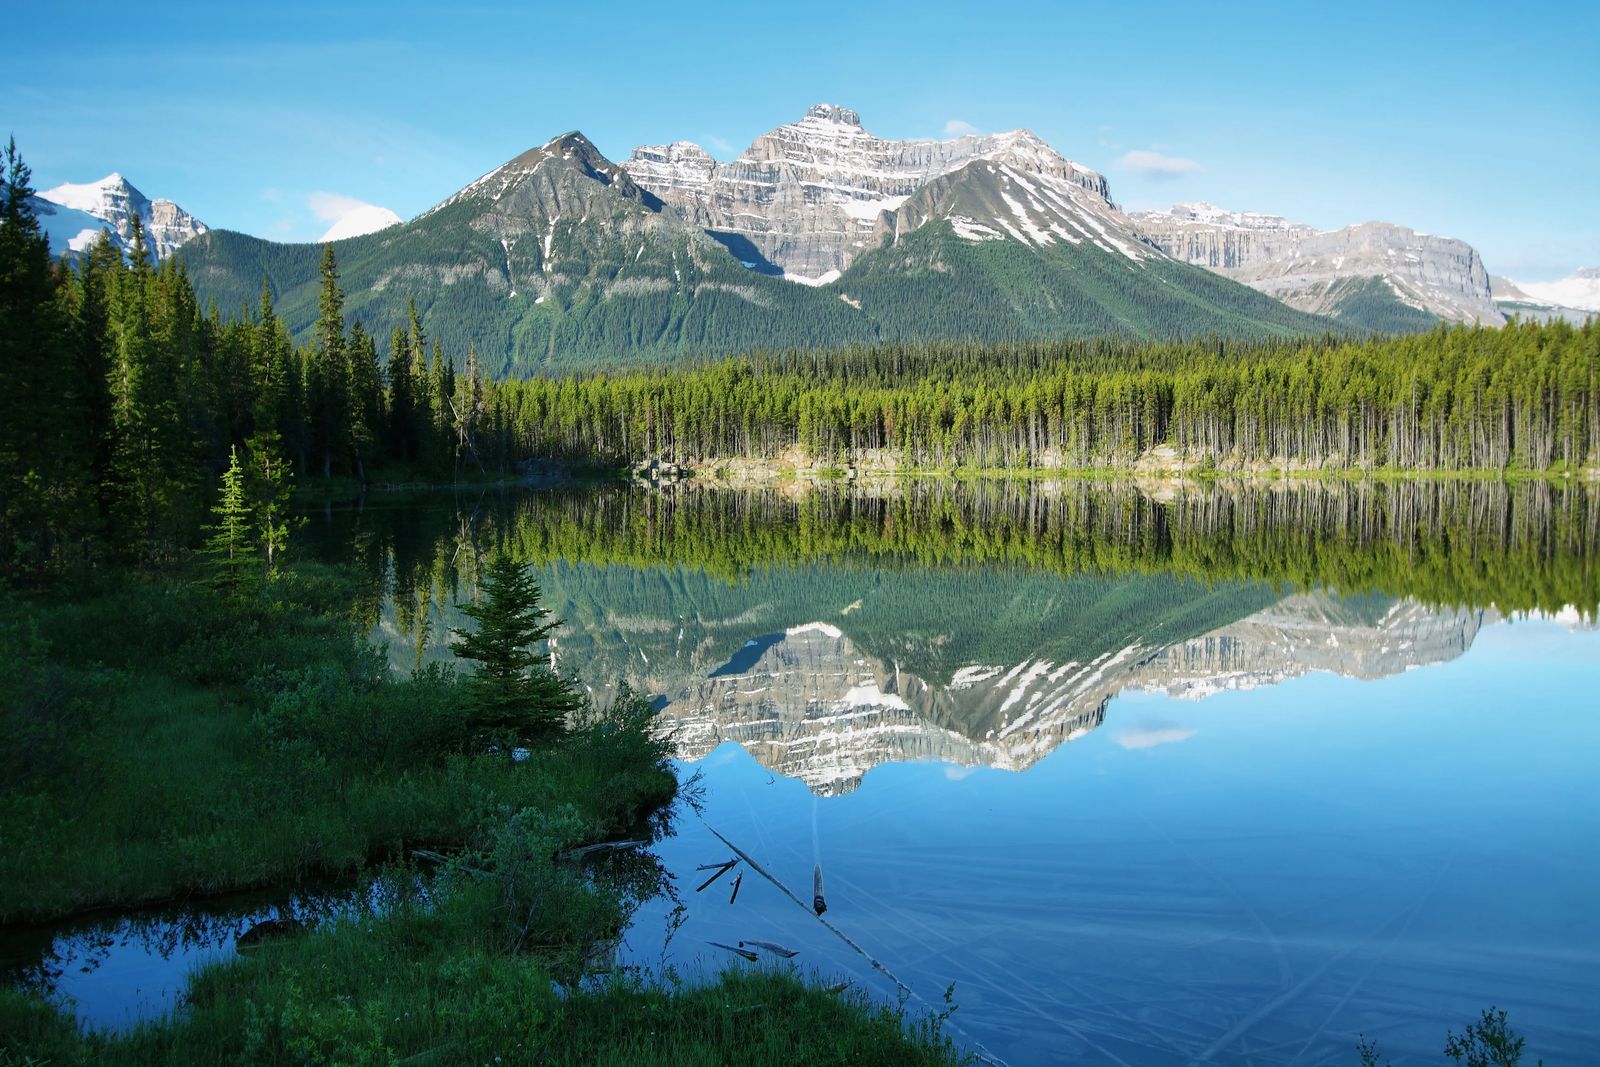 Hebert Lake - The BEST of the Icefields Parkway Banff